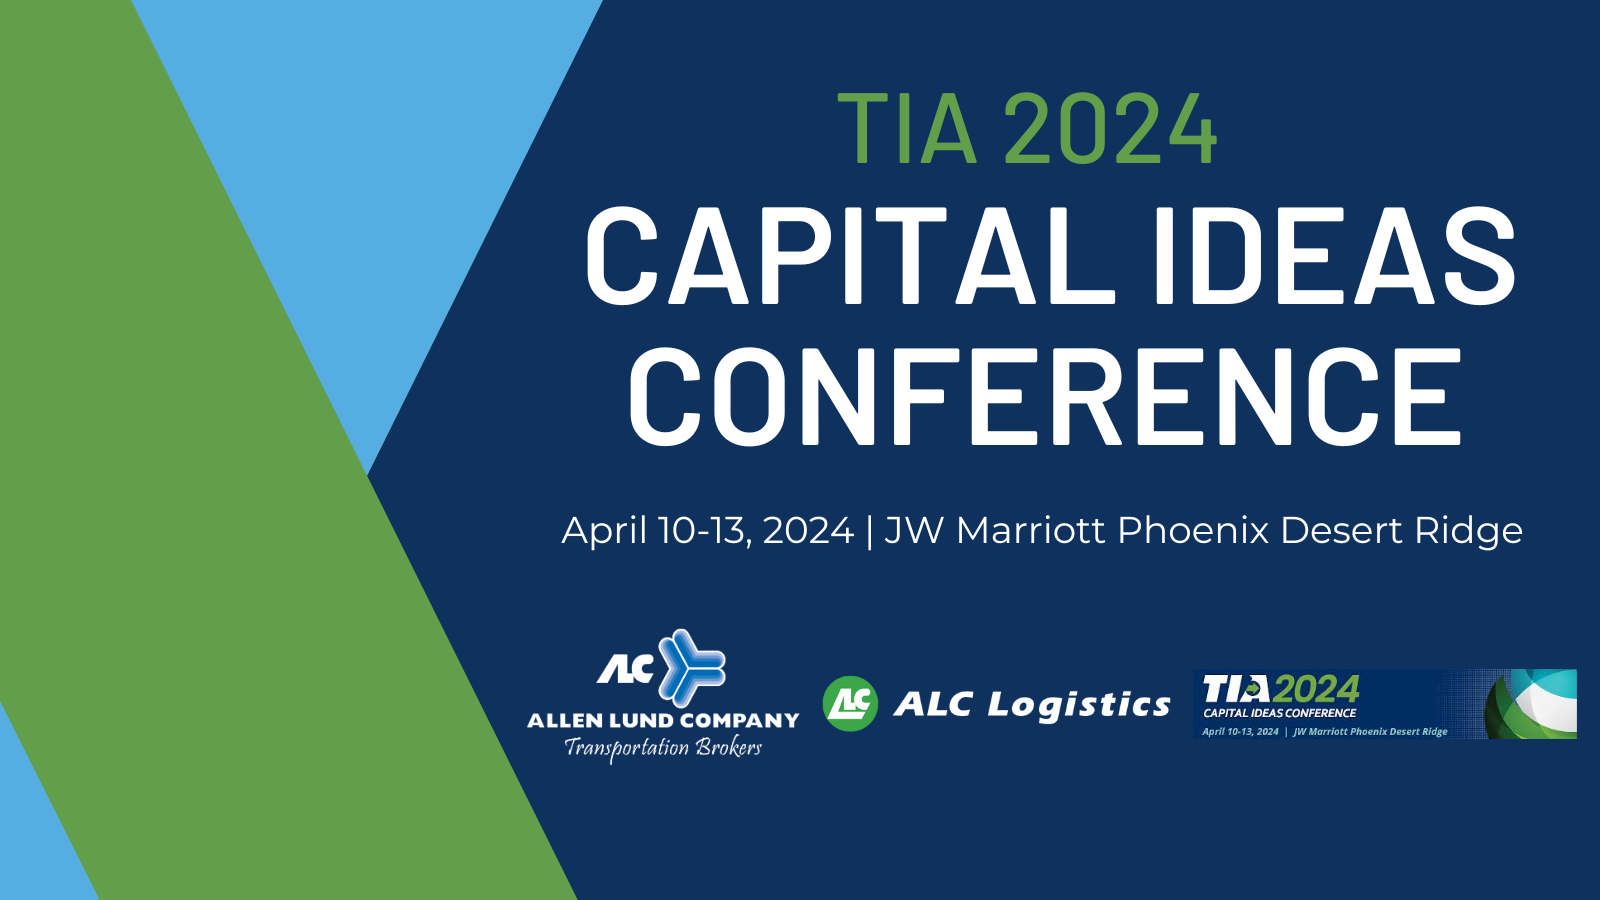 ALC will be attending the TIA Capital Ideas Conference 2024